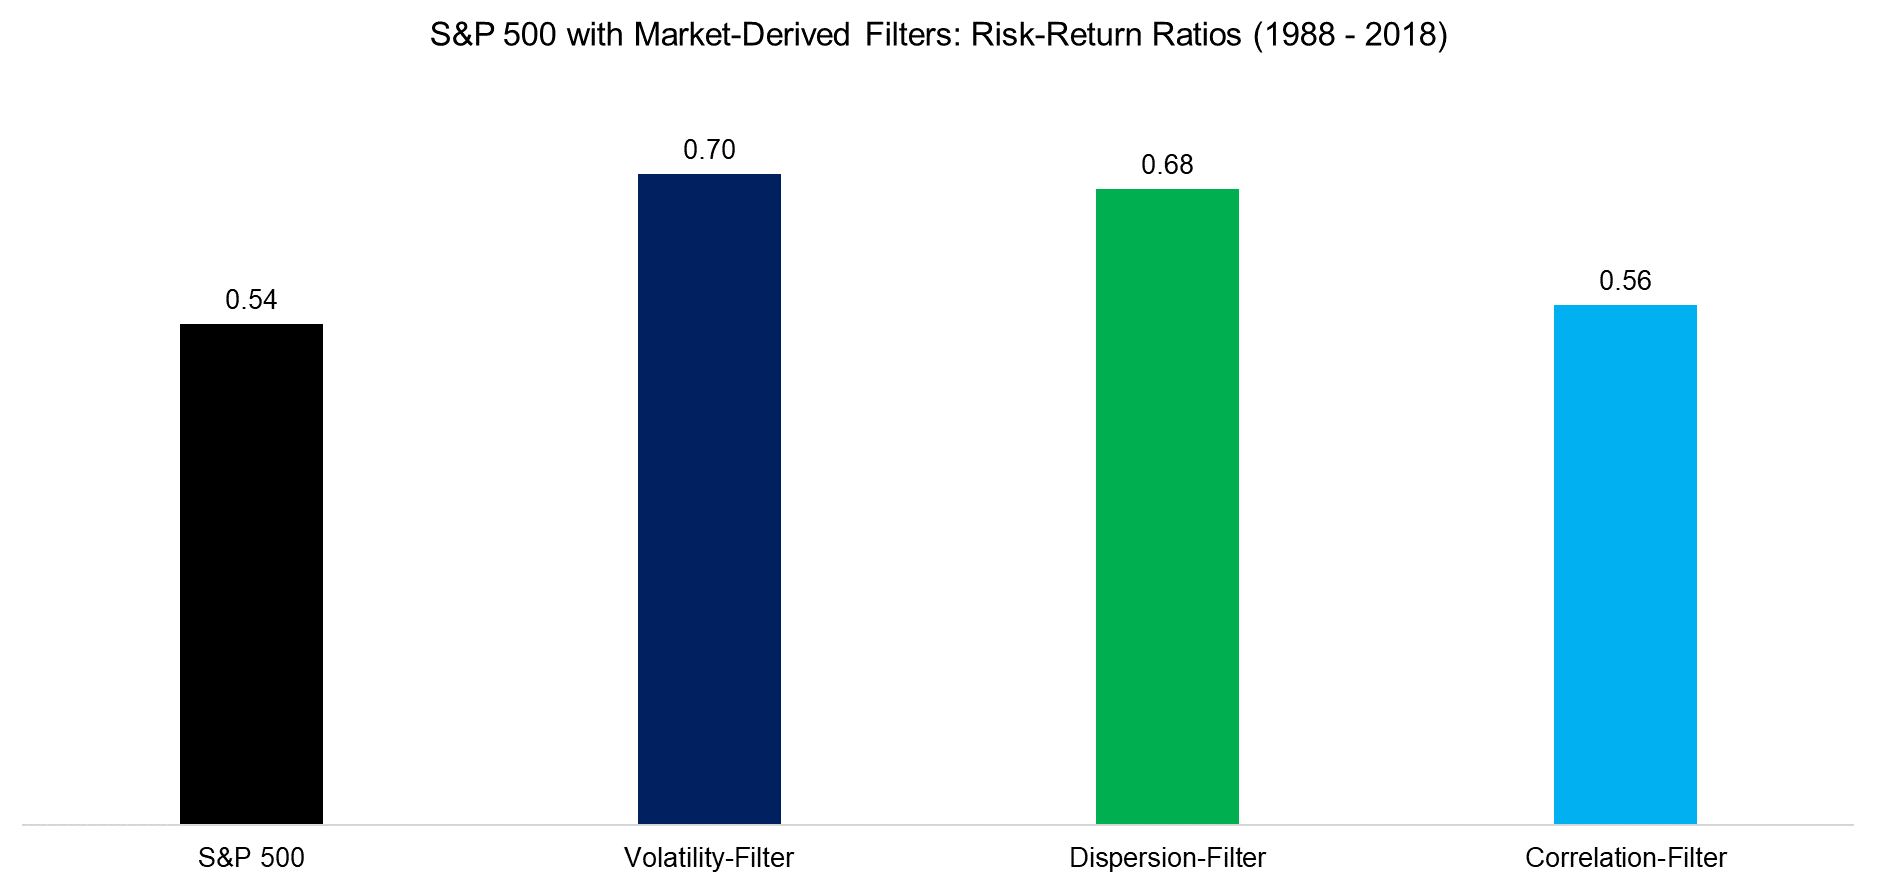 S&P 500 with Market-Derived Filters Risk-Return Ratios (1988 - 2018)